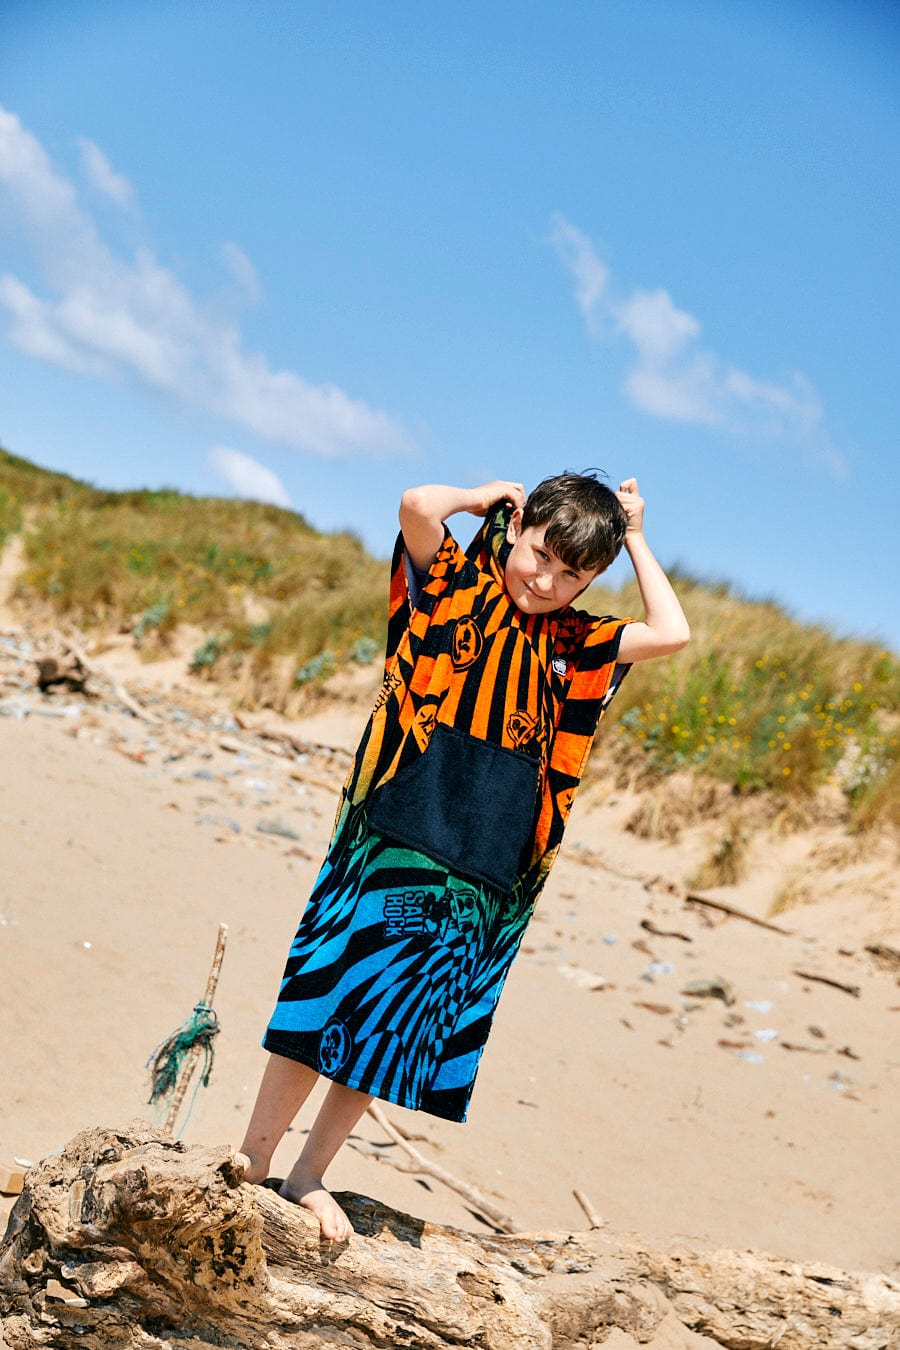 A child stands on a sandy beach, wrapped in an oversized Saltrock Warp Icon - Kids Changing Towel - Blue/Orange with colorful patterns over their clothes. The background displays dunes and greenery under a clear blue sky.